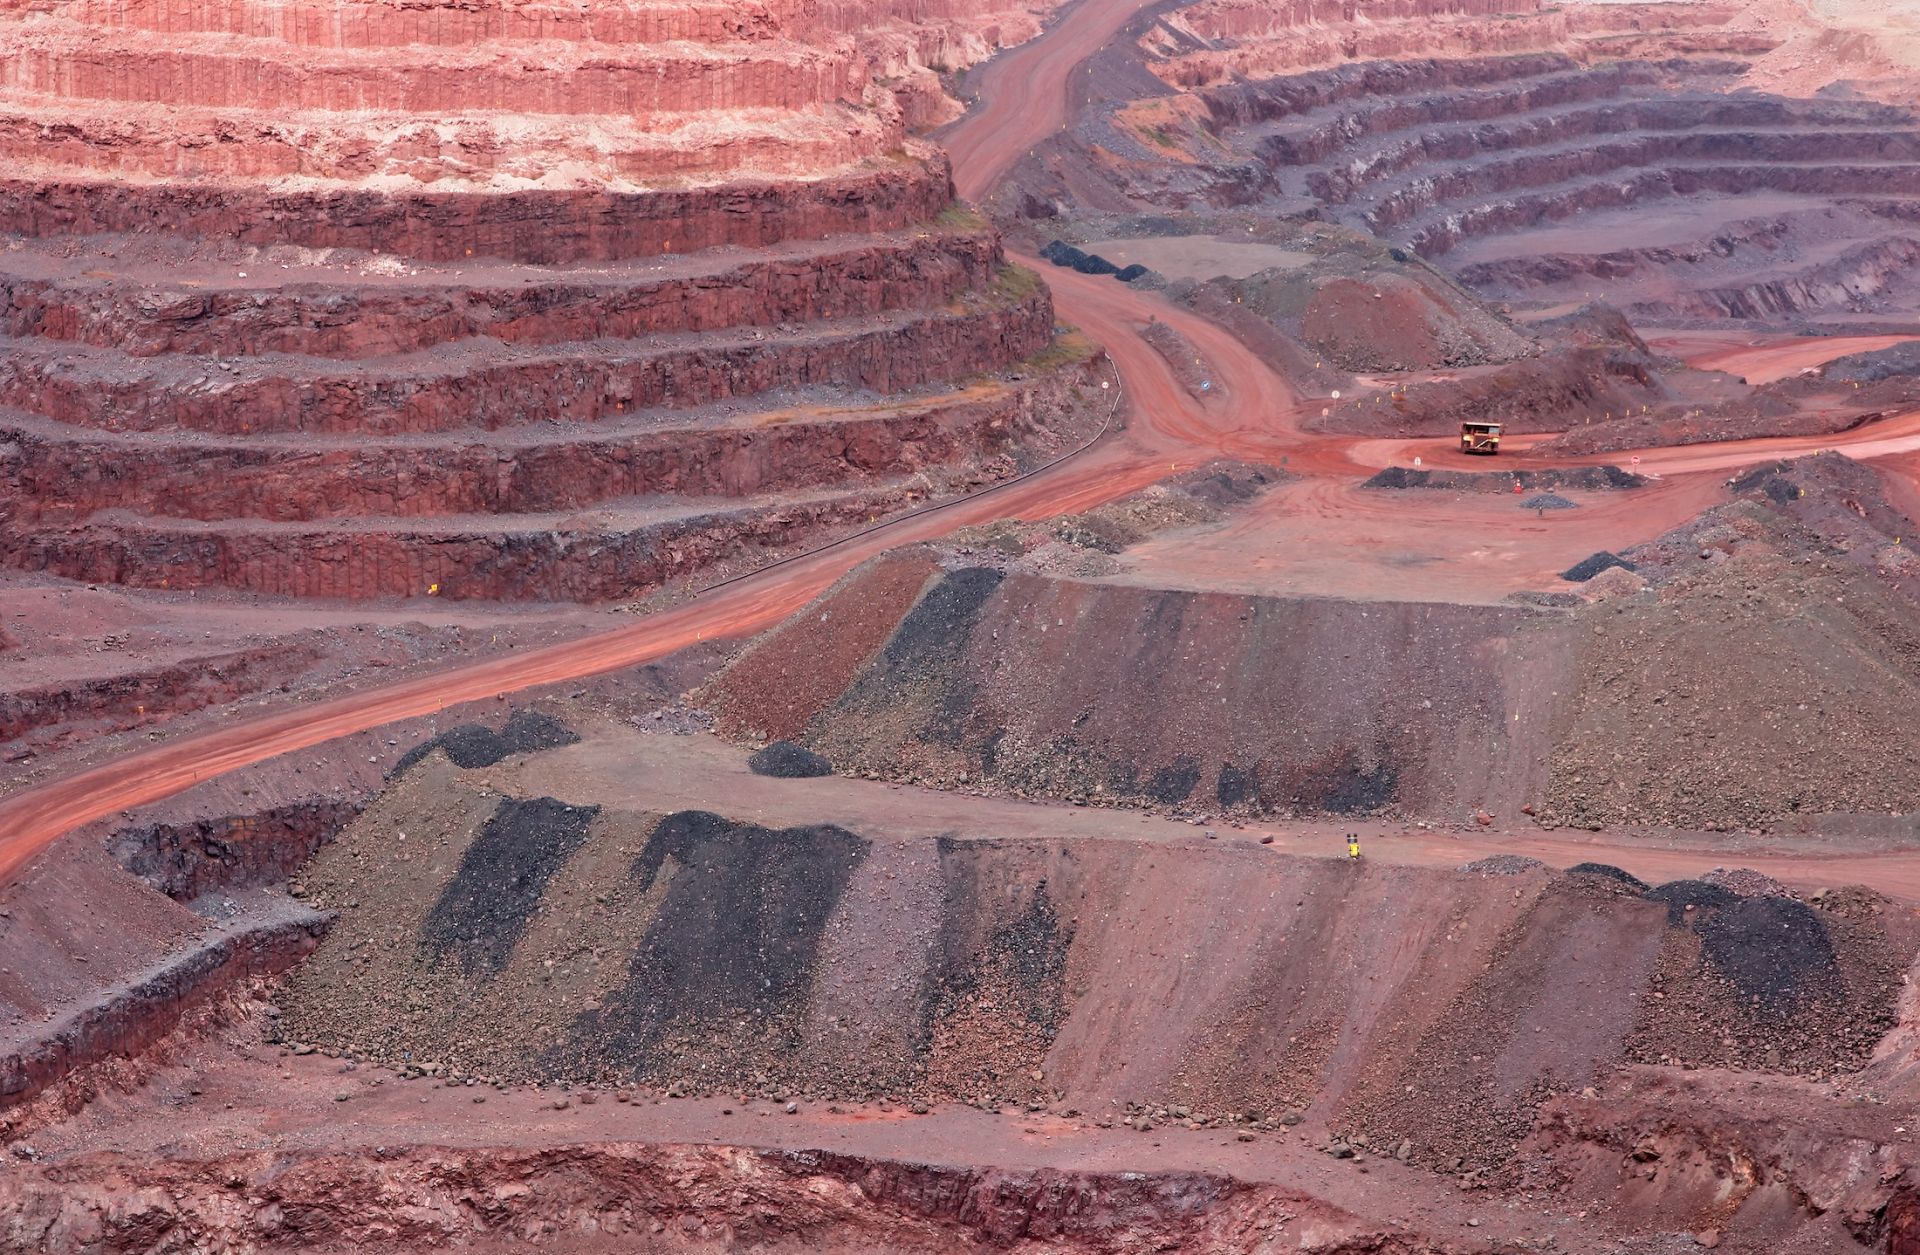 A stock photo shows a large, open-pit iron ore mine with various layers of soil.